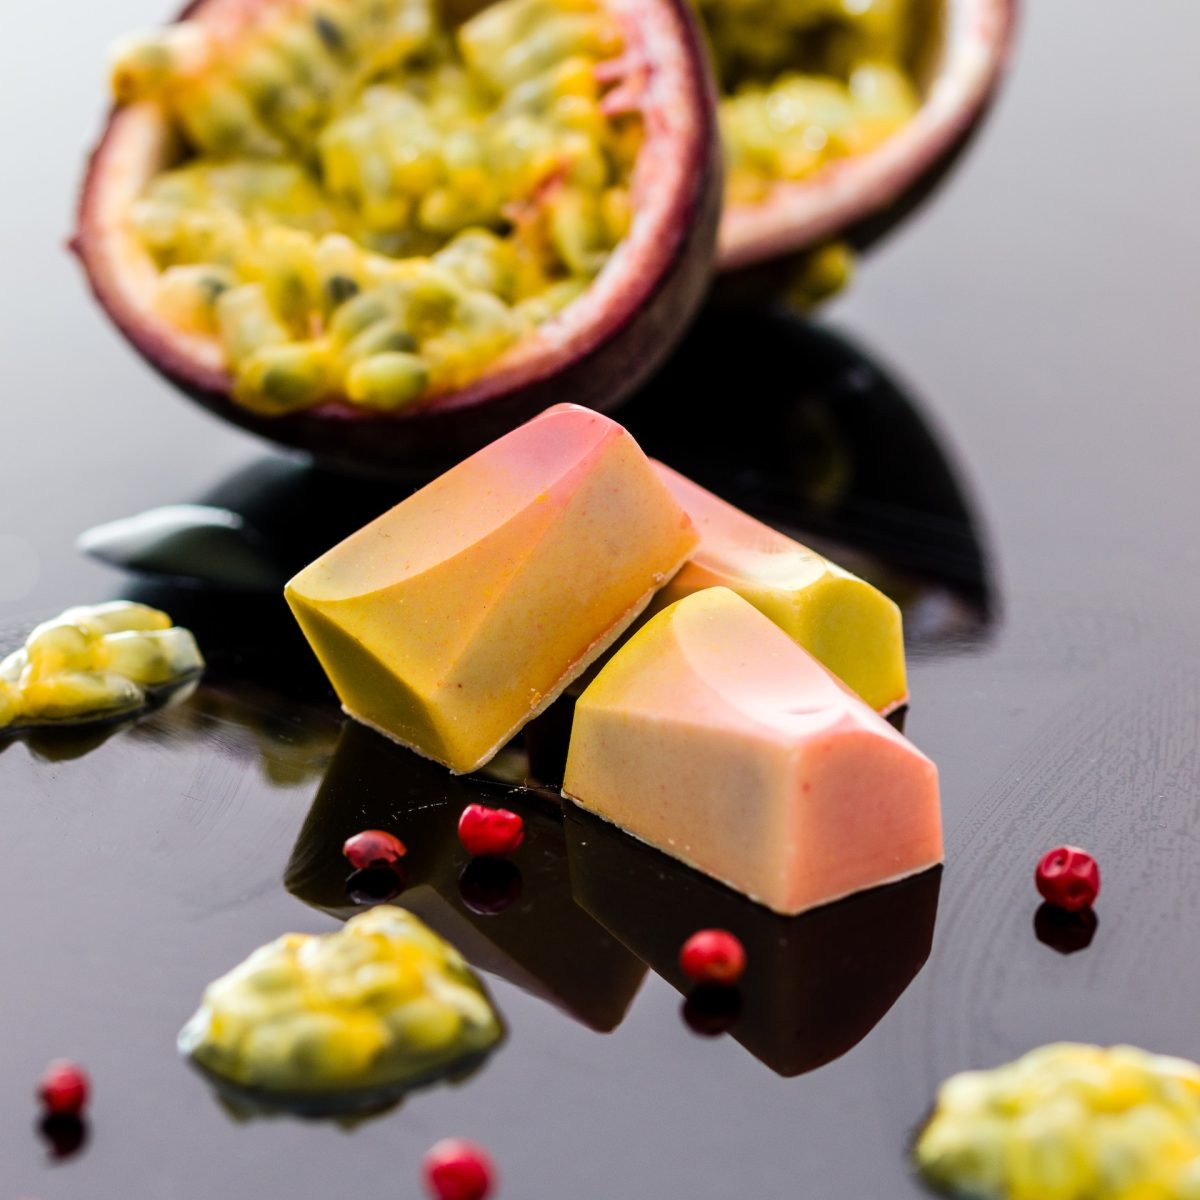 How to Eat Passion Fruit: Instructions, Tips, and Recipes